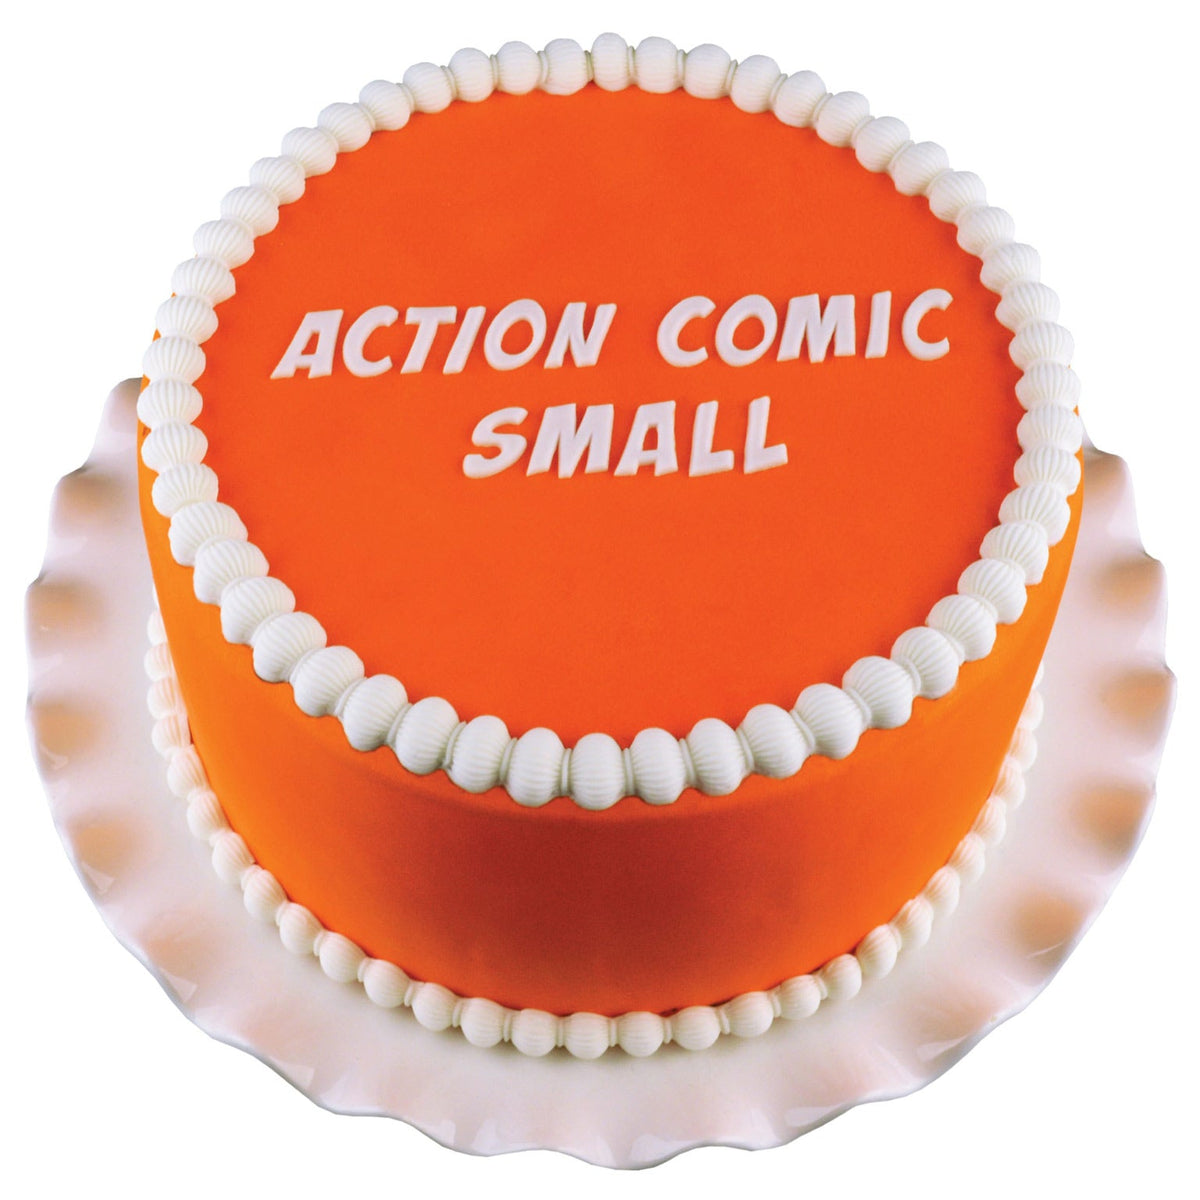 Decorated Cake using Small Action Comic Flexabet Food Safe Silicone Letter Maker by Marvelous Molds